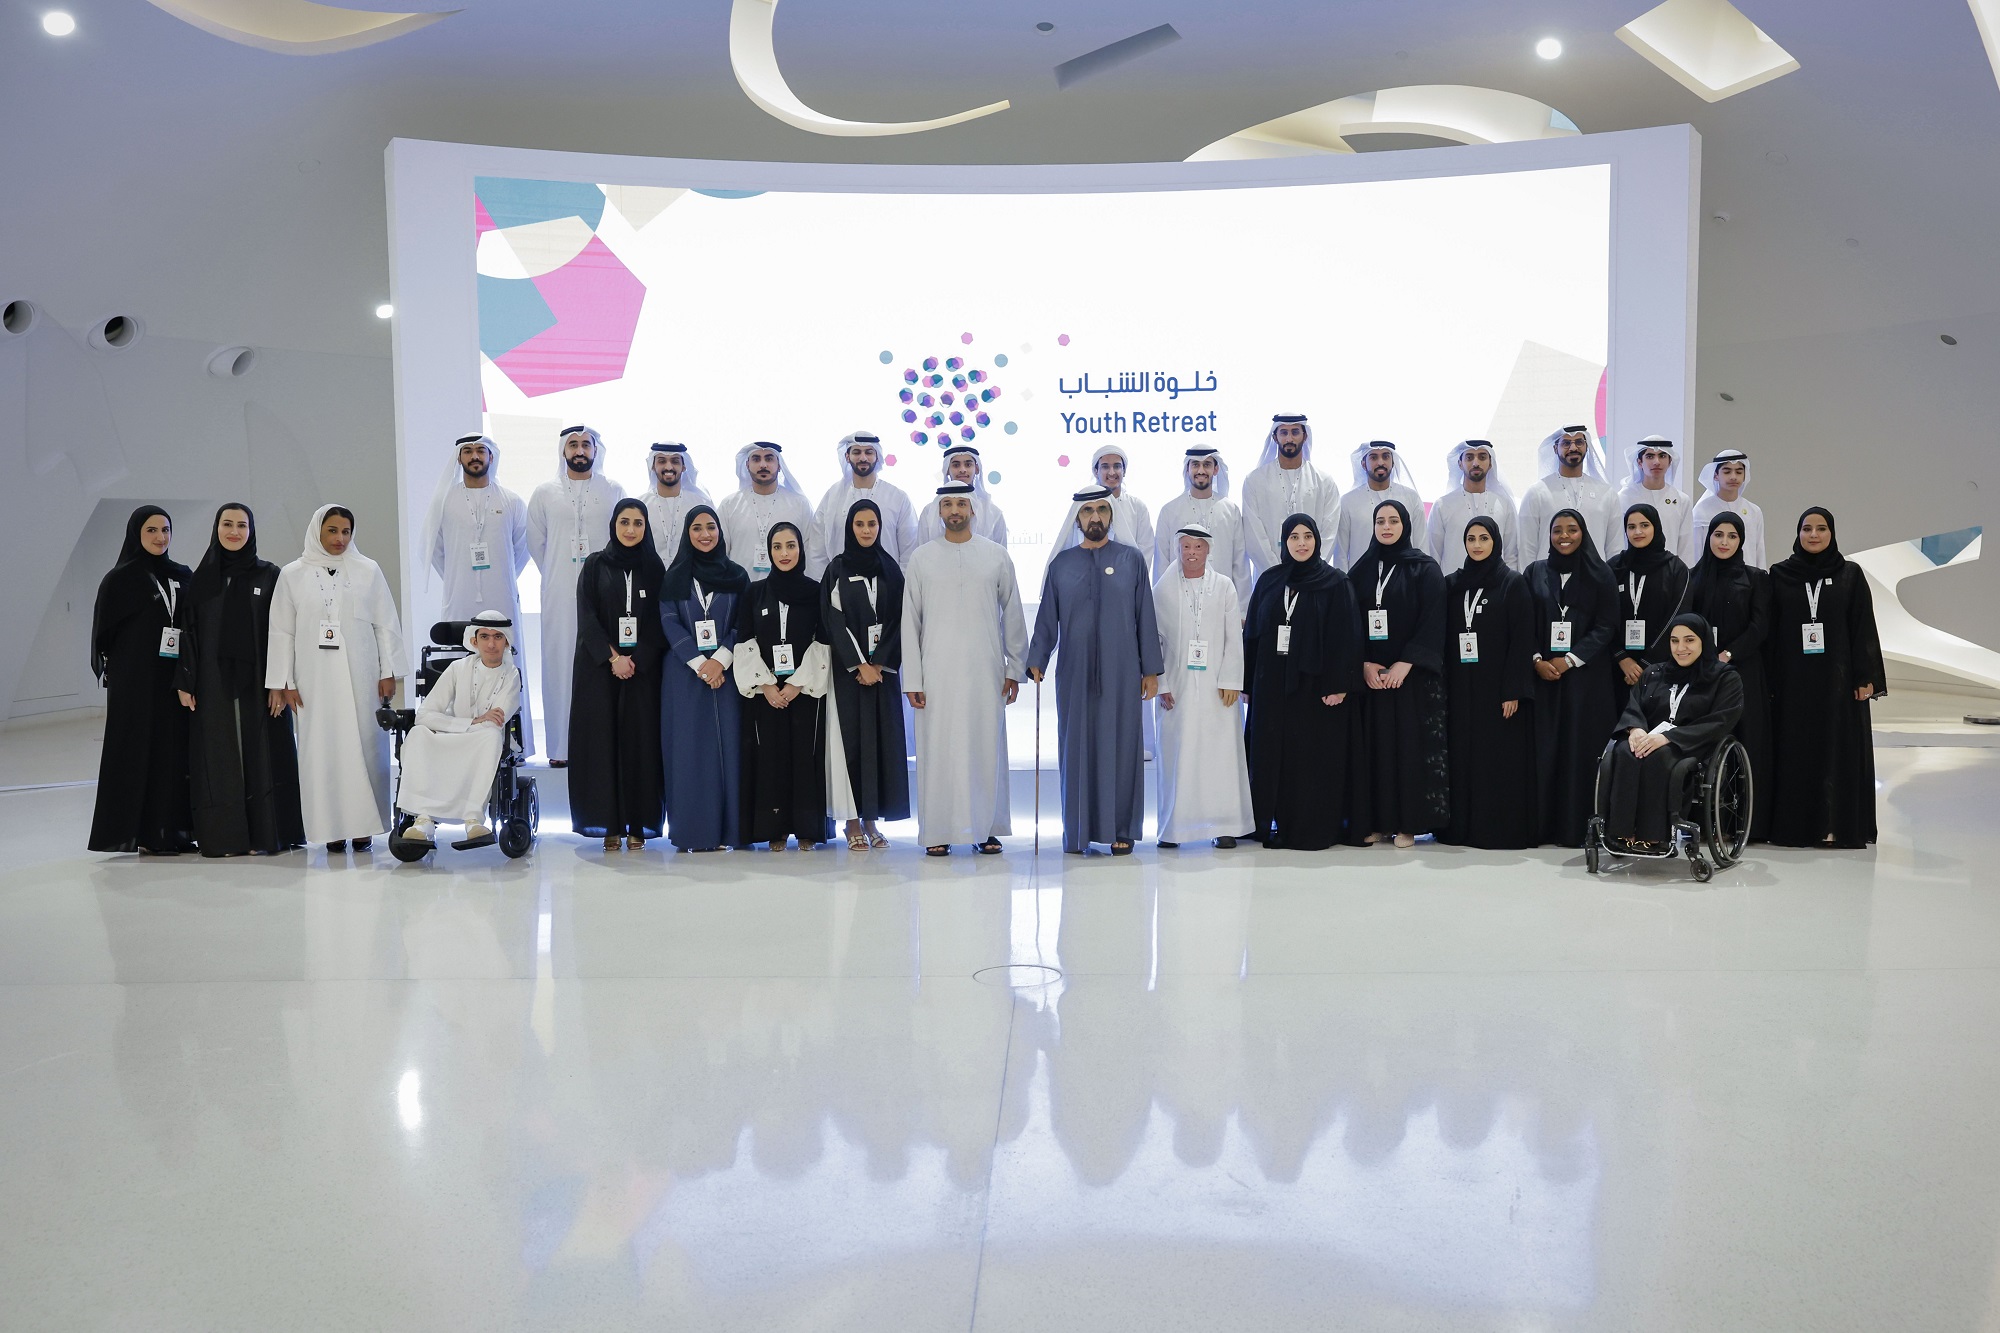 Mohammed bin Rashid meets with 200 Emirati young people in ‘Youth Retreat’